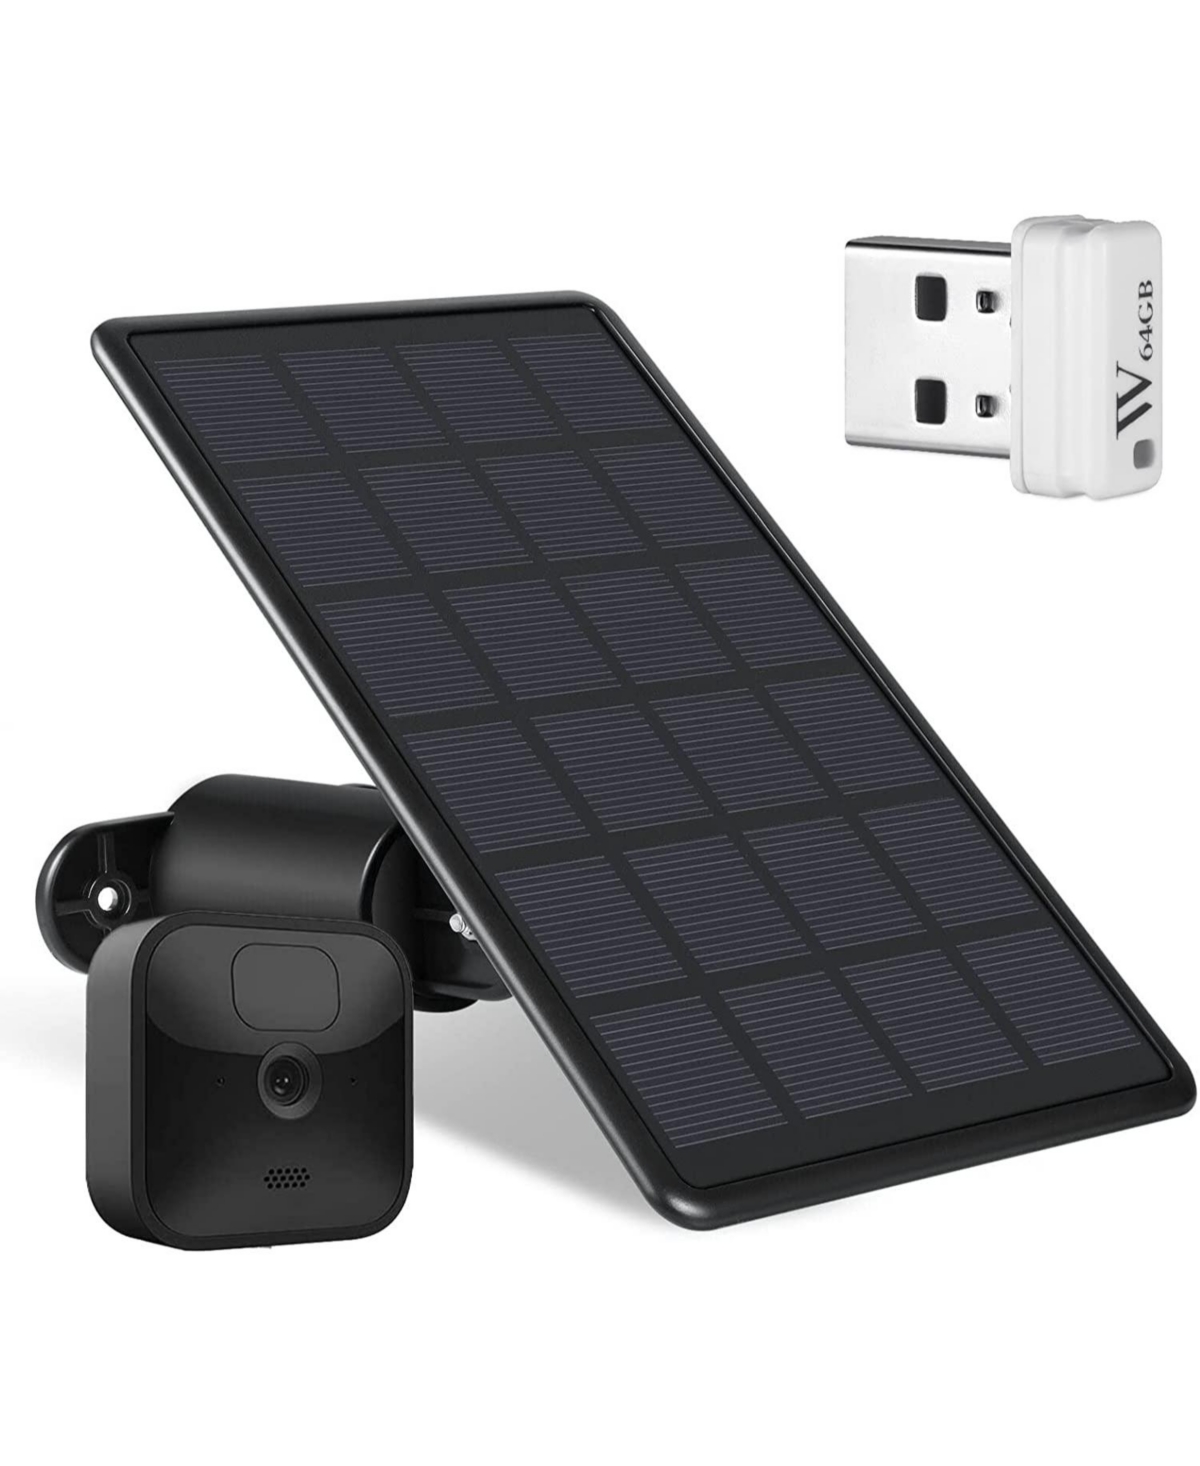 Wasserstein Solar Panel for Blink Outdoor & Blink Xt2/XT - Additional 64GB Usb Flash Drive Included (Blink Camera Not Included)